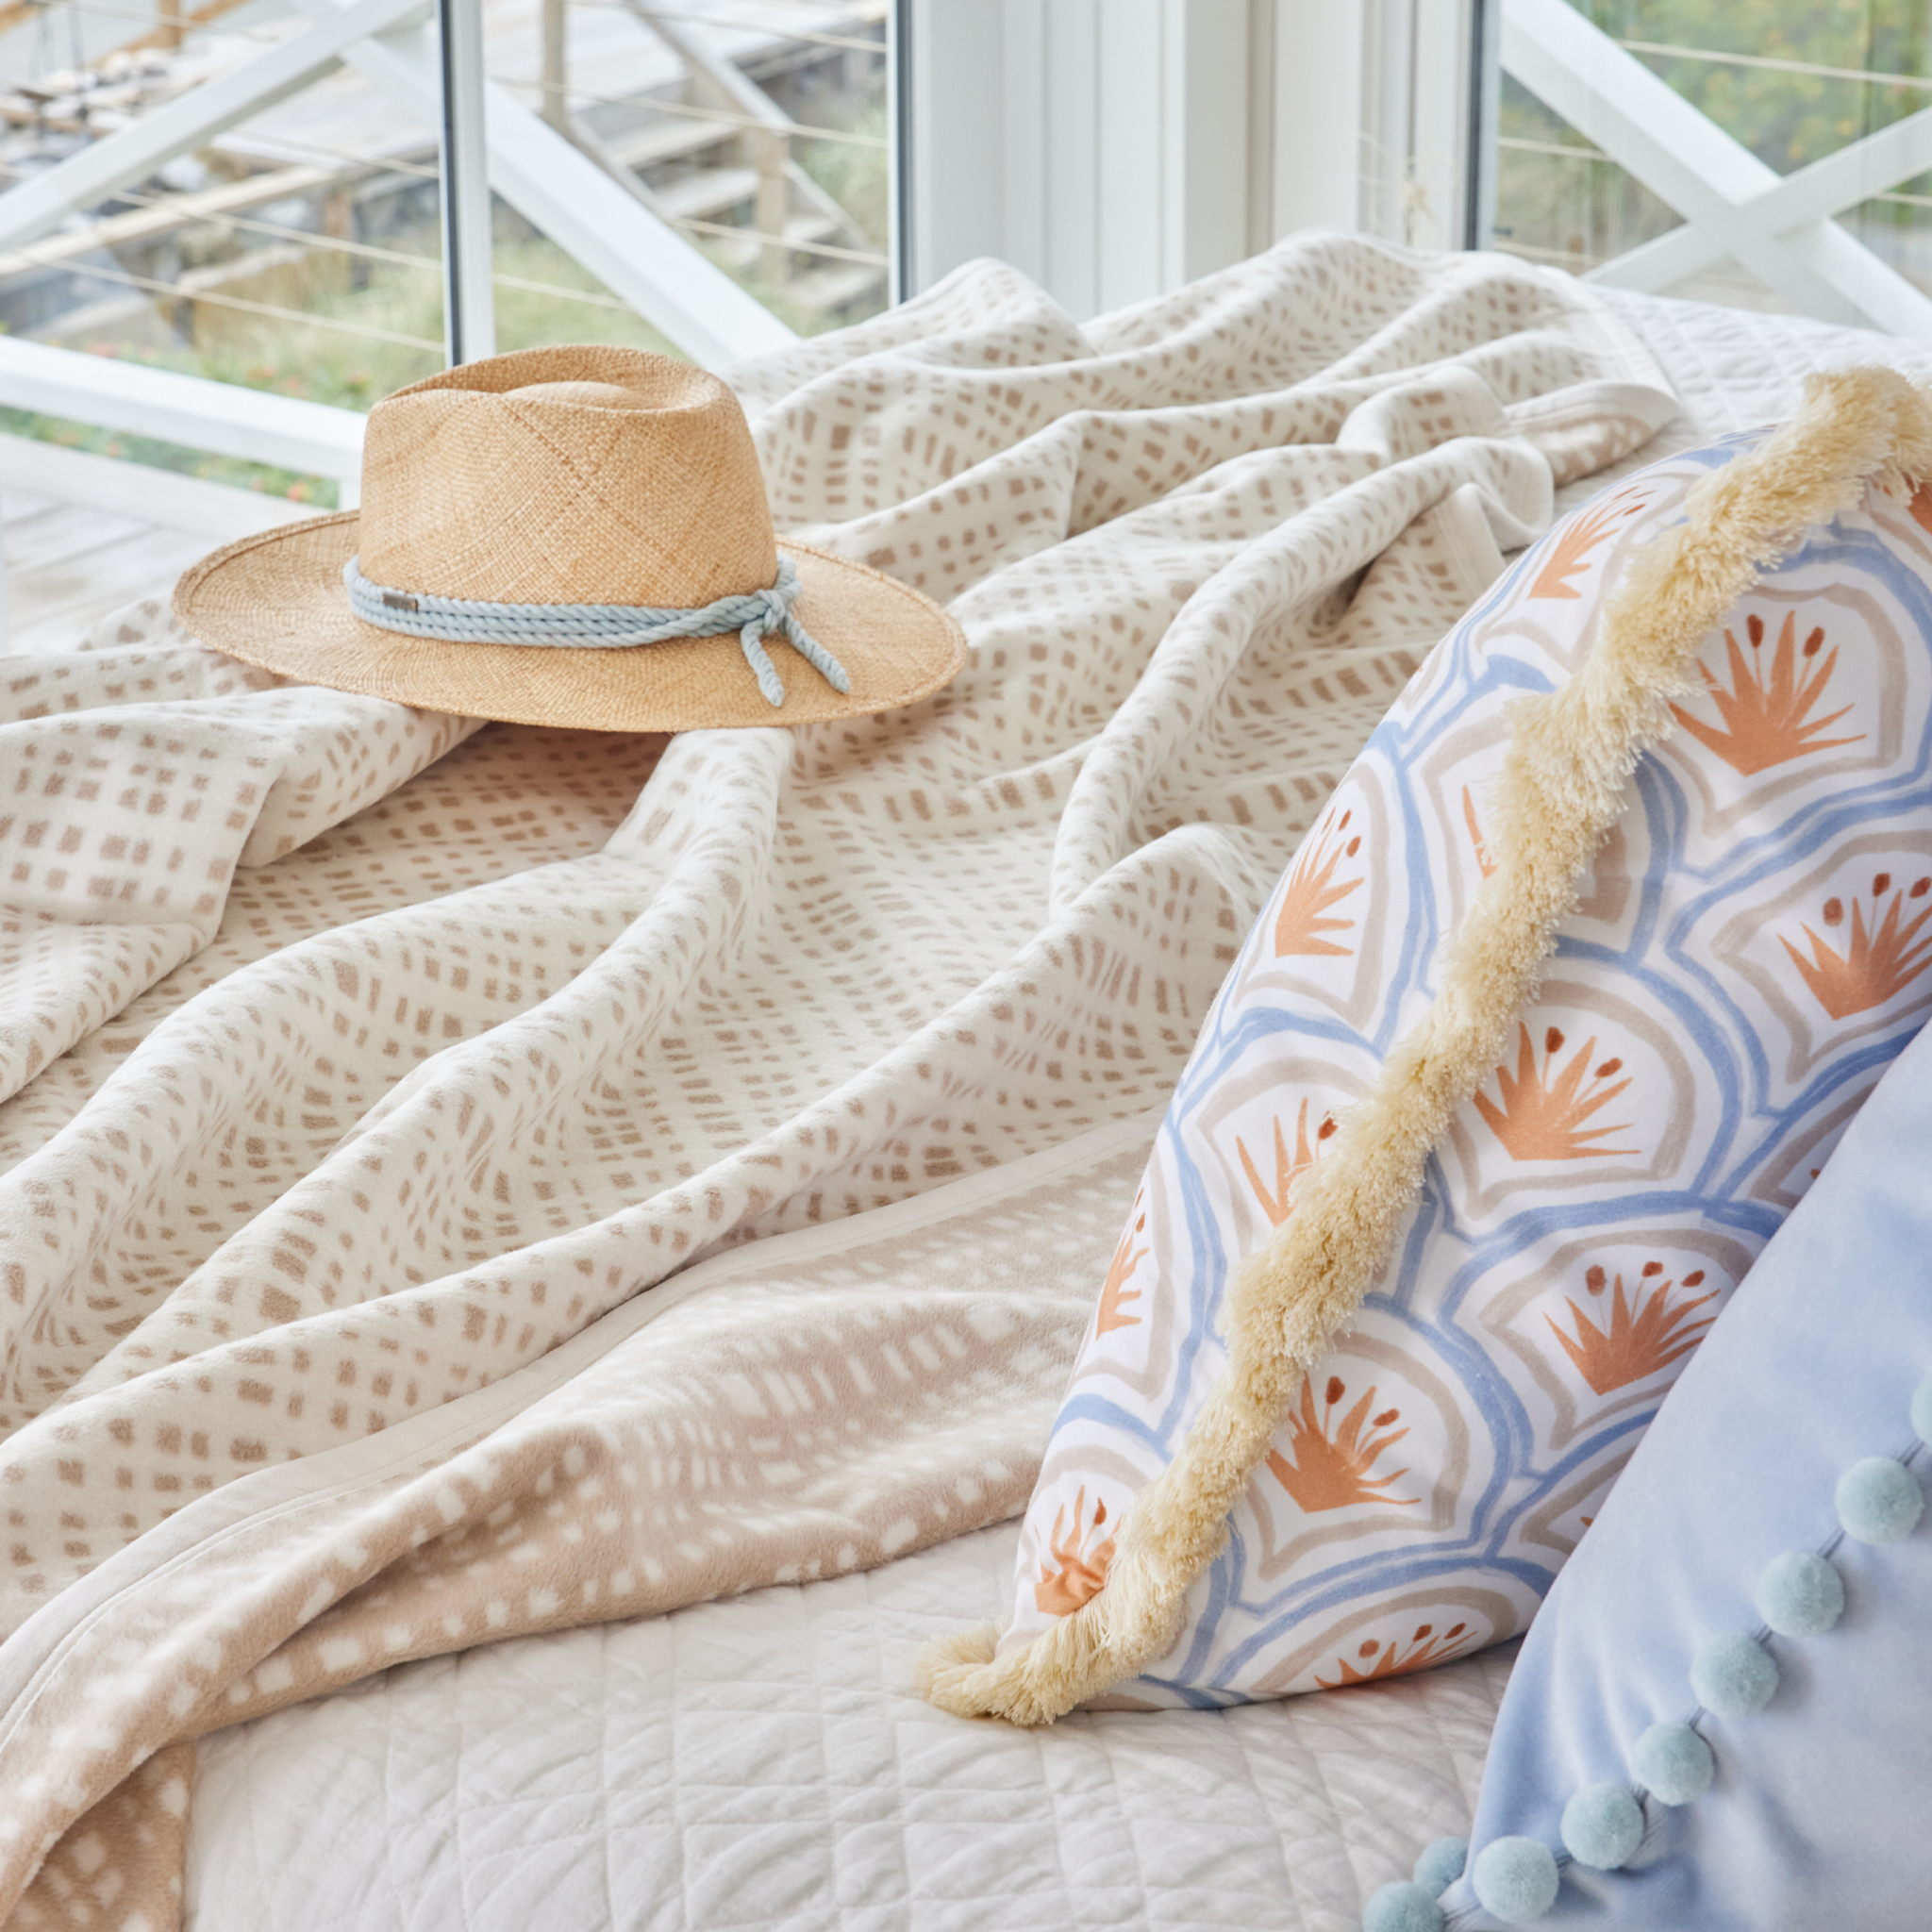 Neutral bed close-up styled with Art Deco Palm Pattern Printed Pillow and Sky Blue Velvet Pillow with Pom Poms next to a gingham blanket and straw hat.